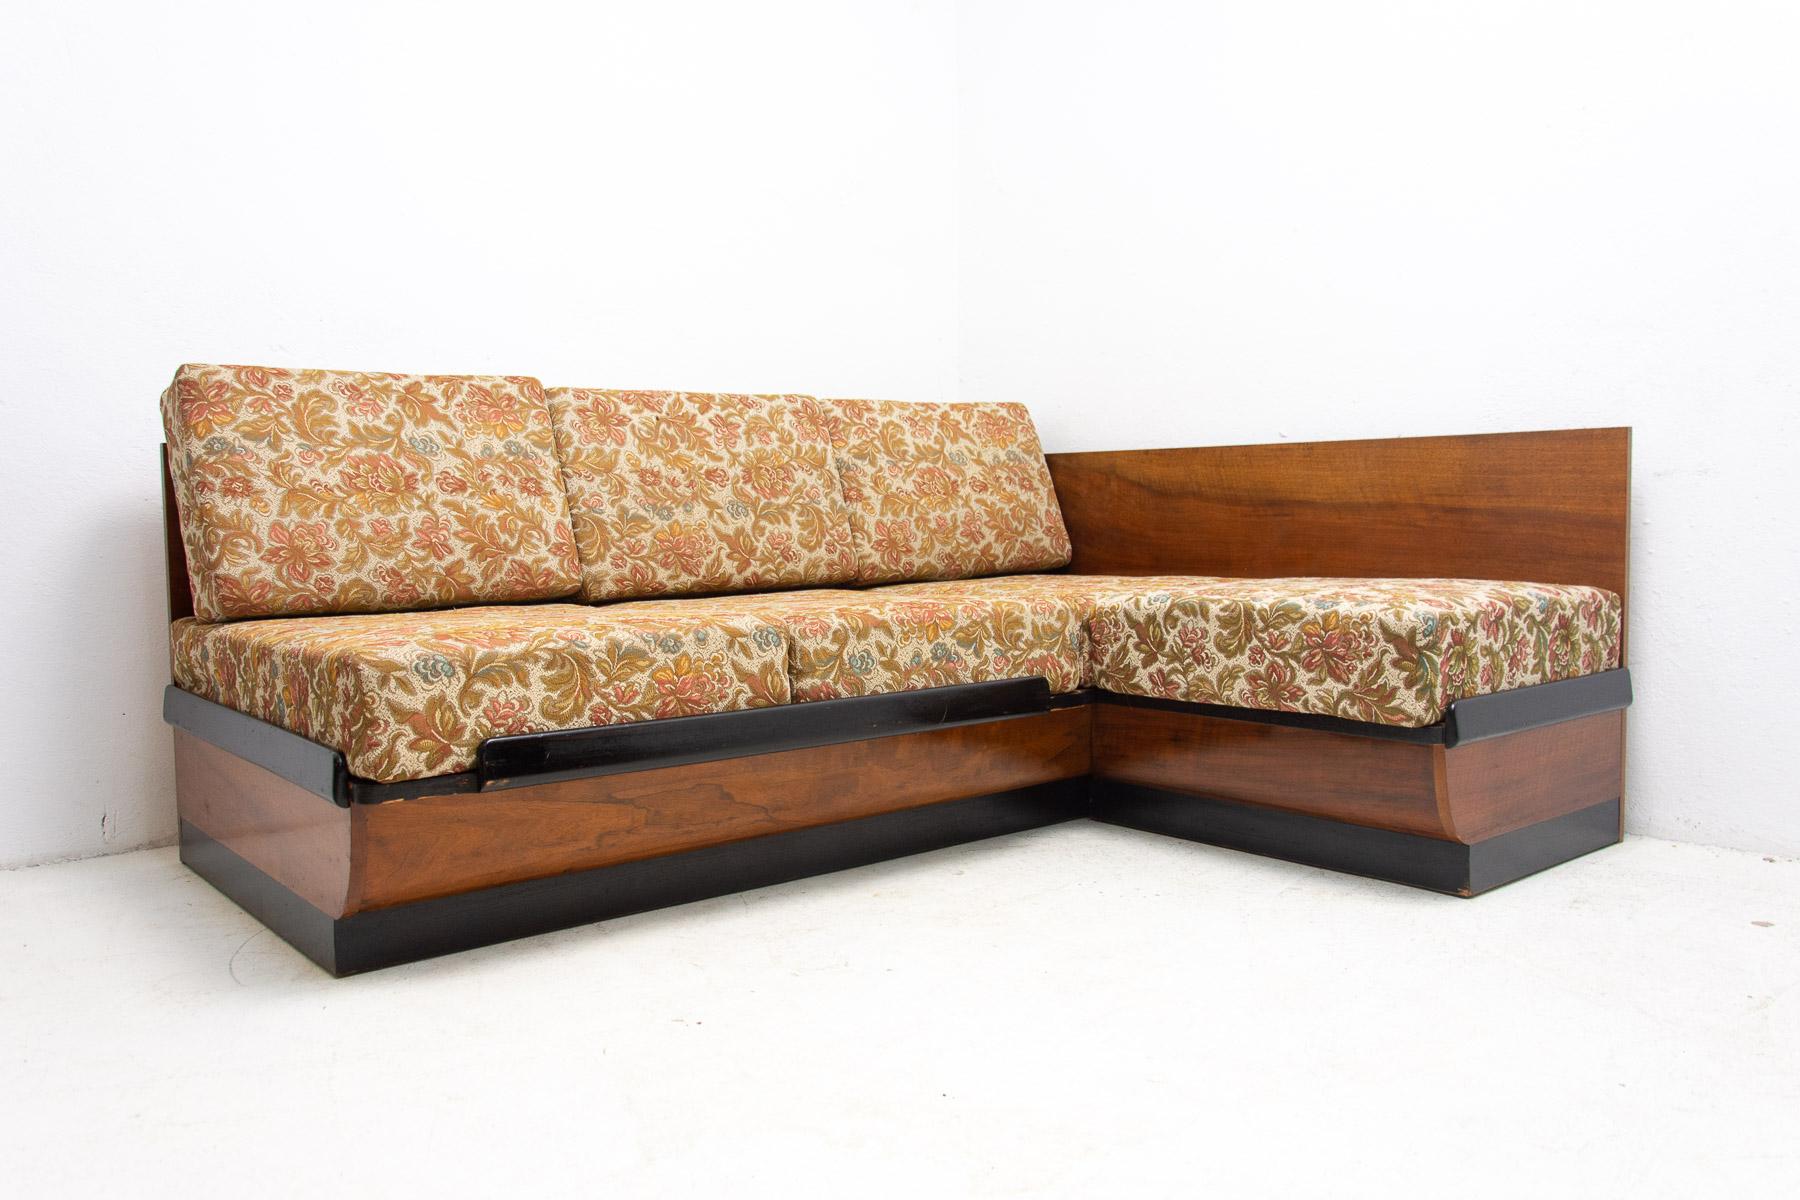 Mid century corner sofa bed designed by Jindrich Halabala. It was made in the former Czechoslovakia in the 1950´s. This sofa features a wooden structure that is veneered in walnut. Sofa is adjustable for sleeping and is in very good condition.

